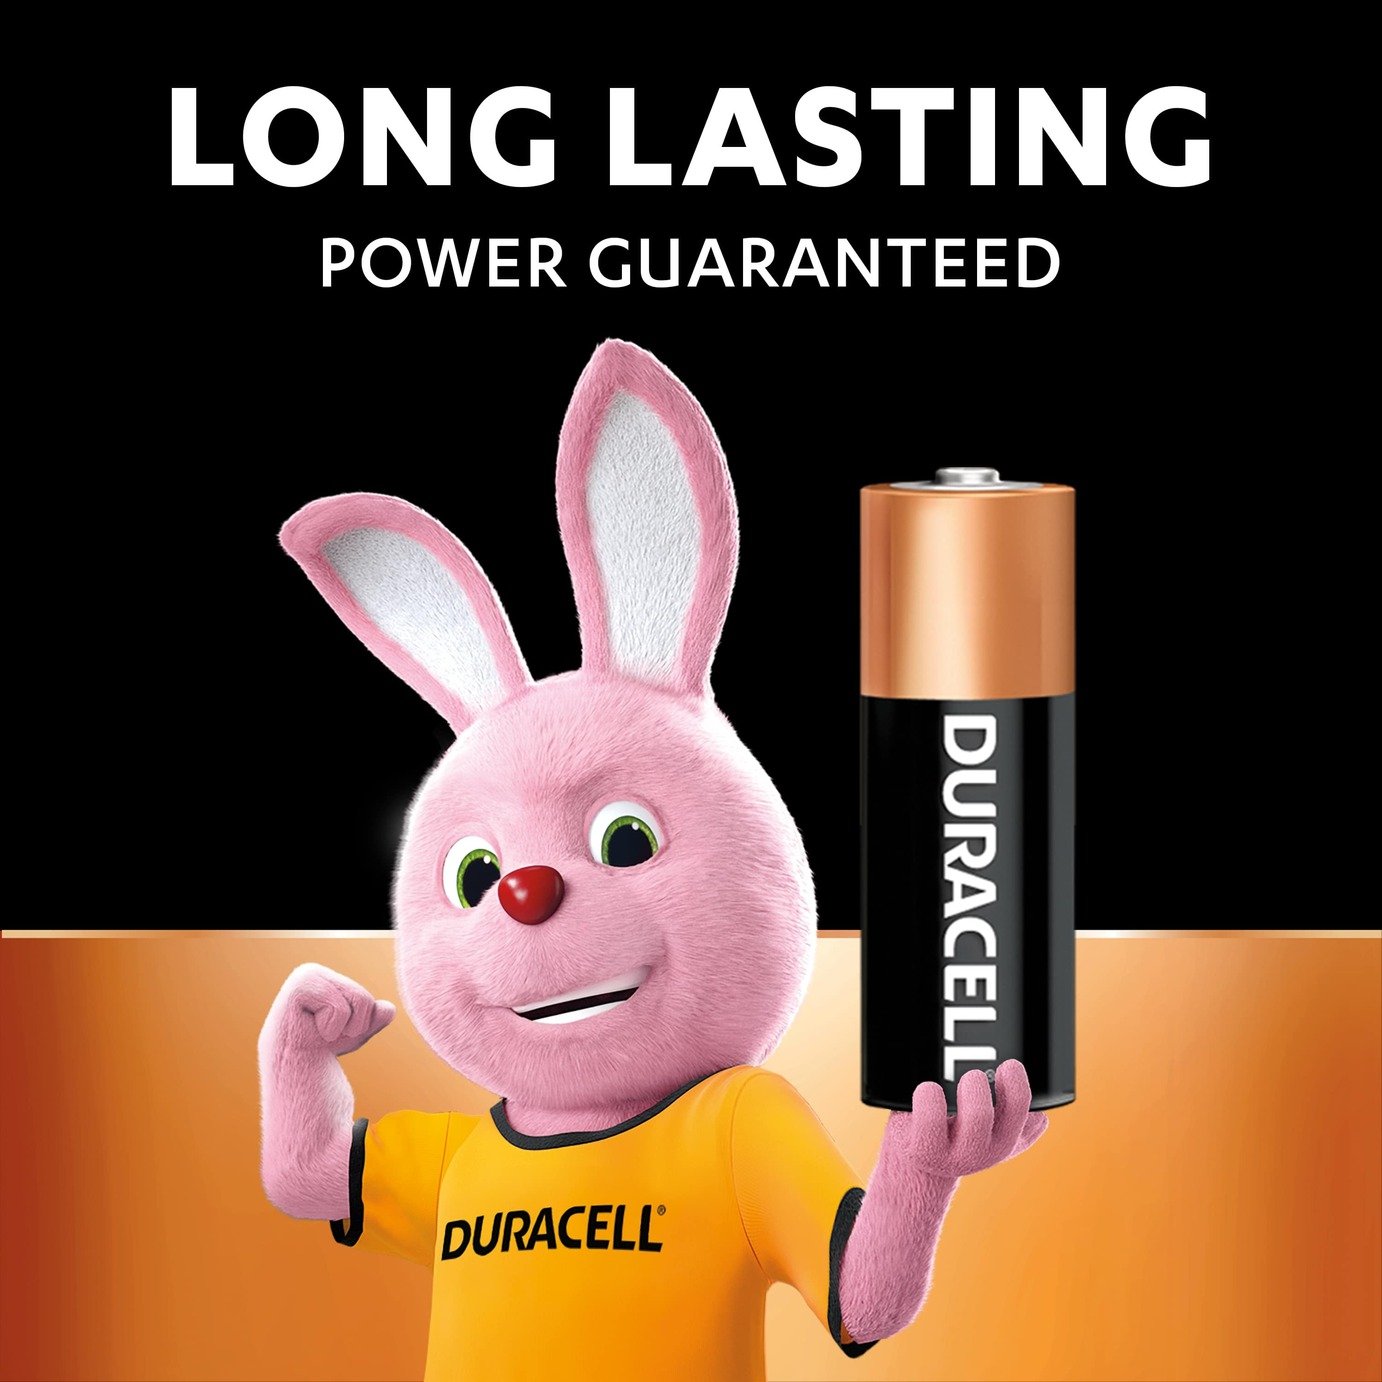 Duracell Specialty Alkaline MN21 Battery 12V Review